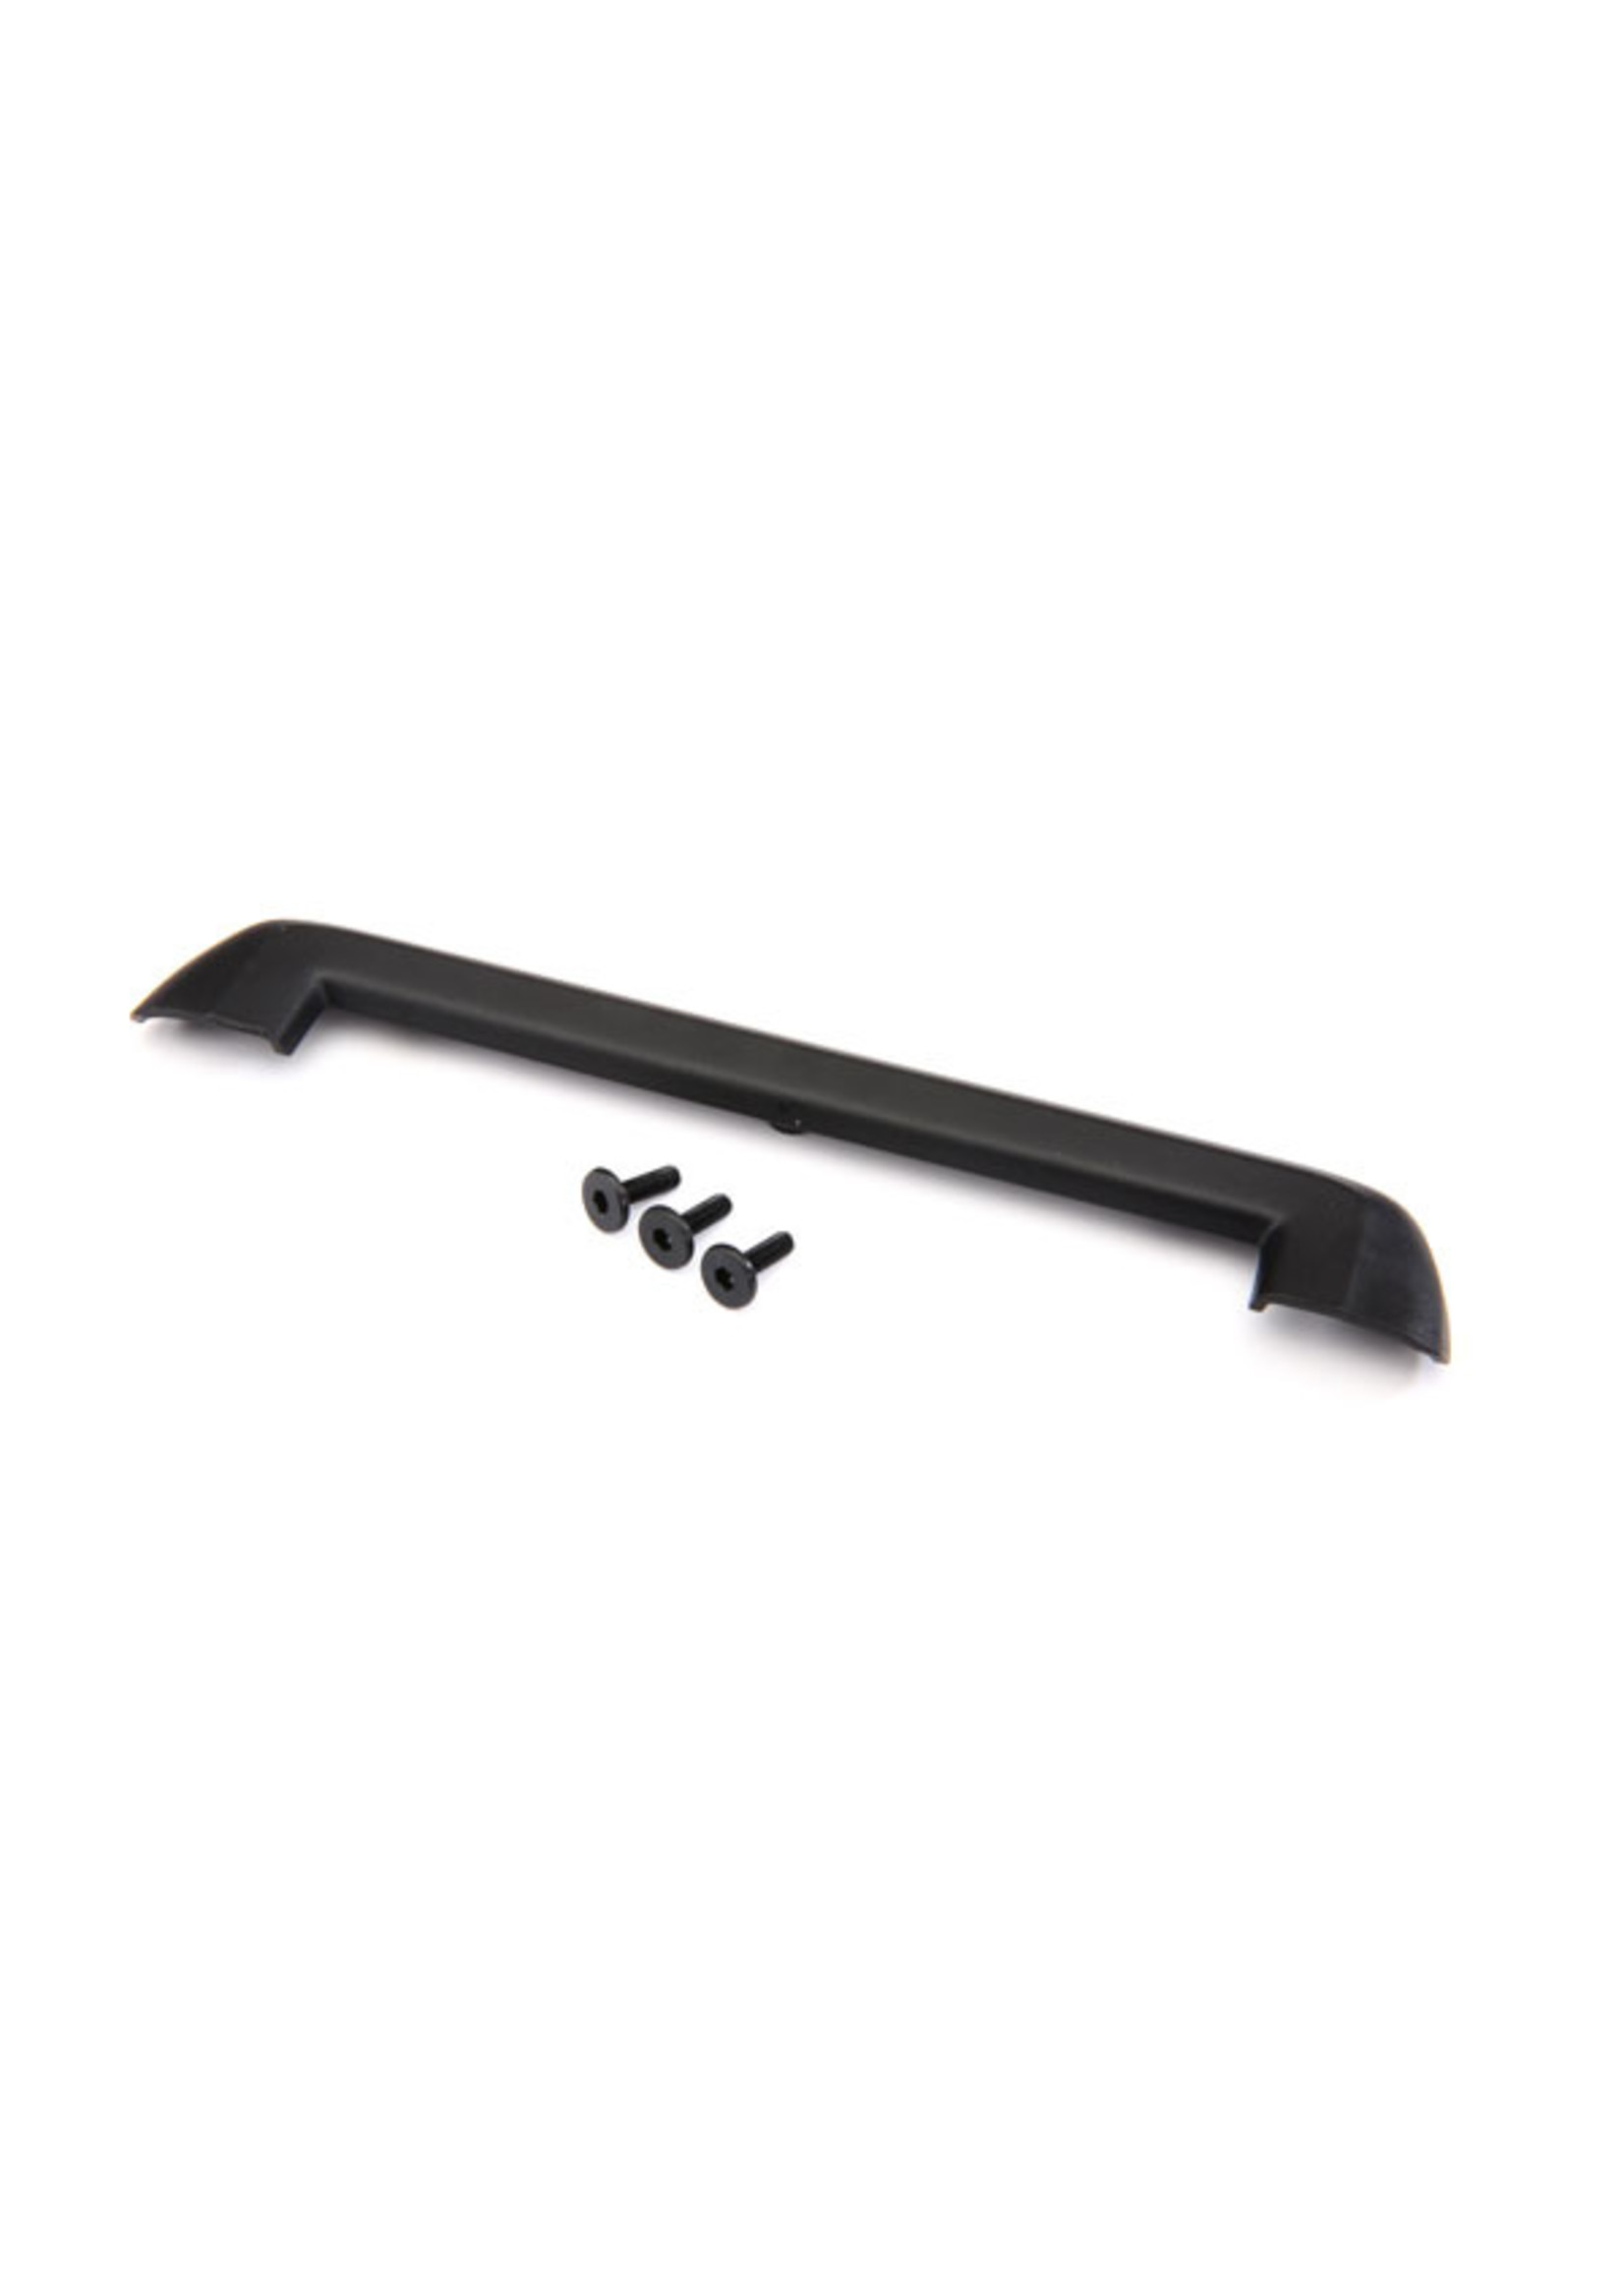 Traxxas 8912 - Tailgate Protector - Black